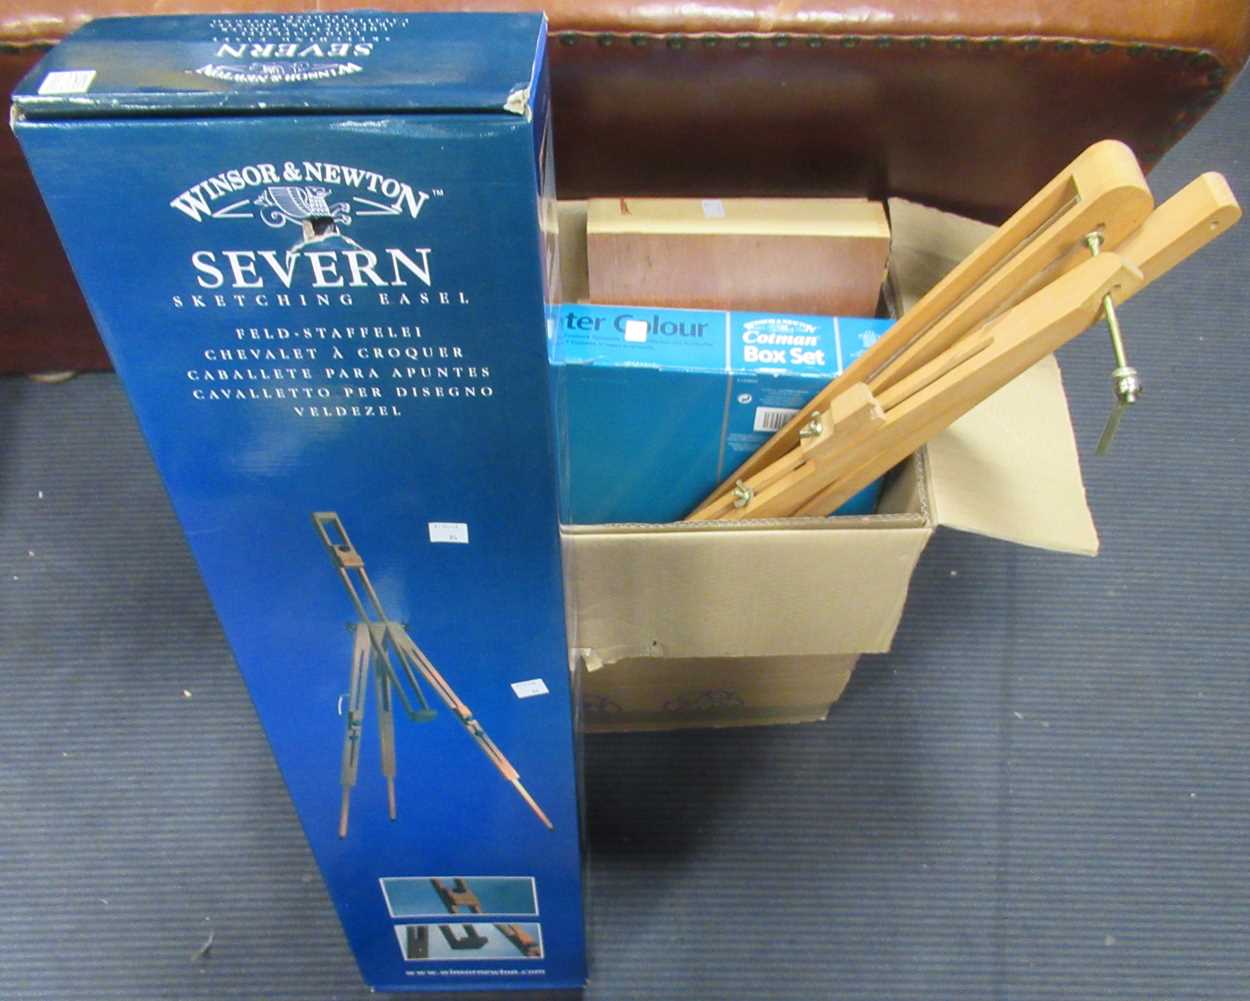 A collection of Windsor & Newton and other art supplies, including easels, paints and other